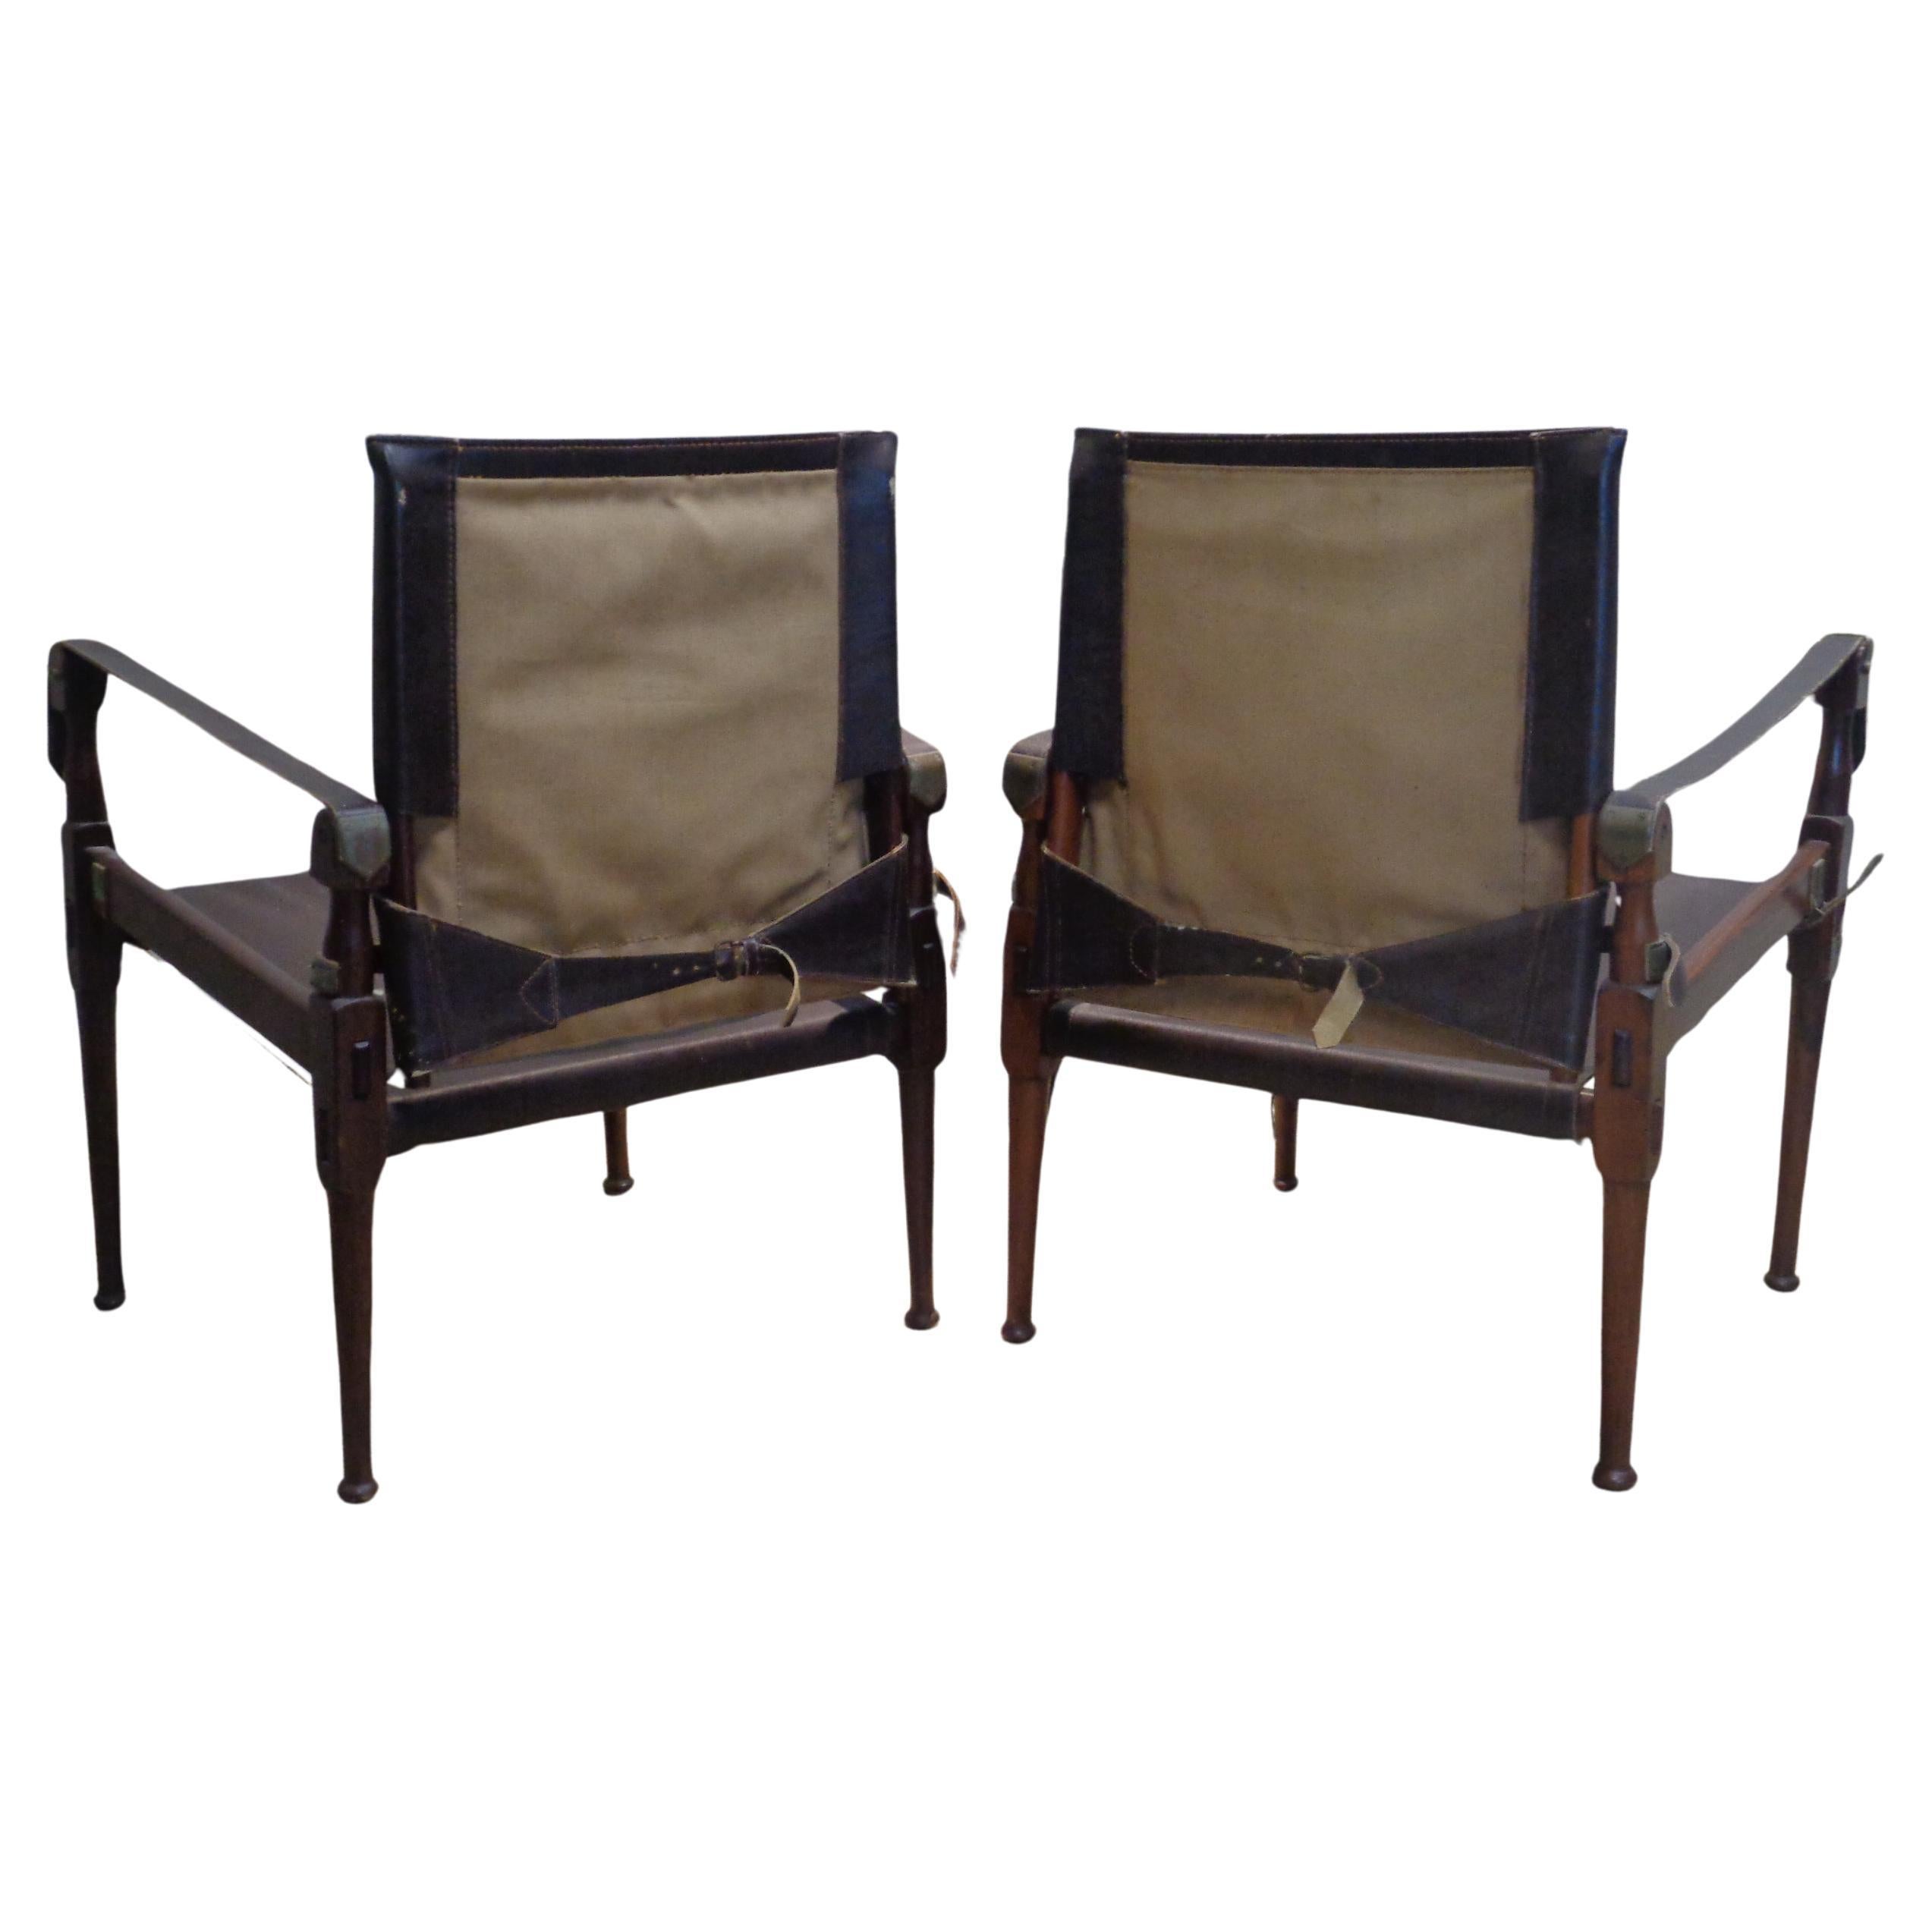 Brass  Campaign Style Safari Chairs, M. Hayat & Bros. 1960-1970 For Sale